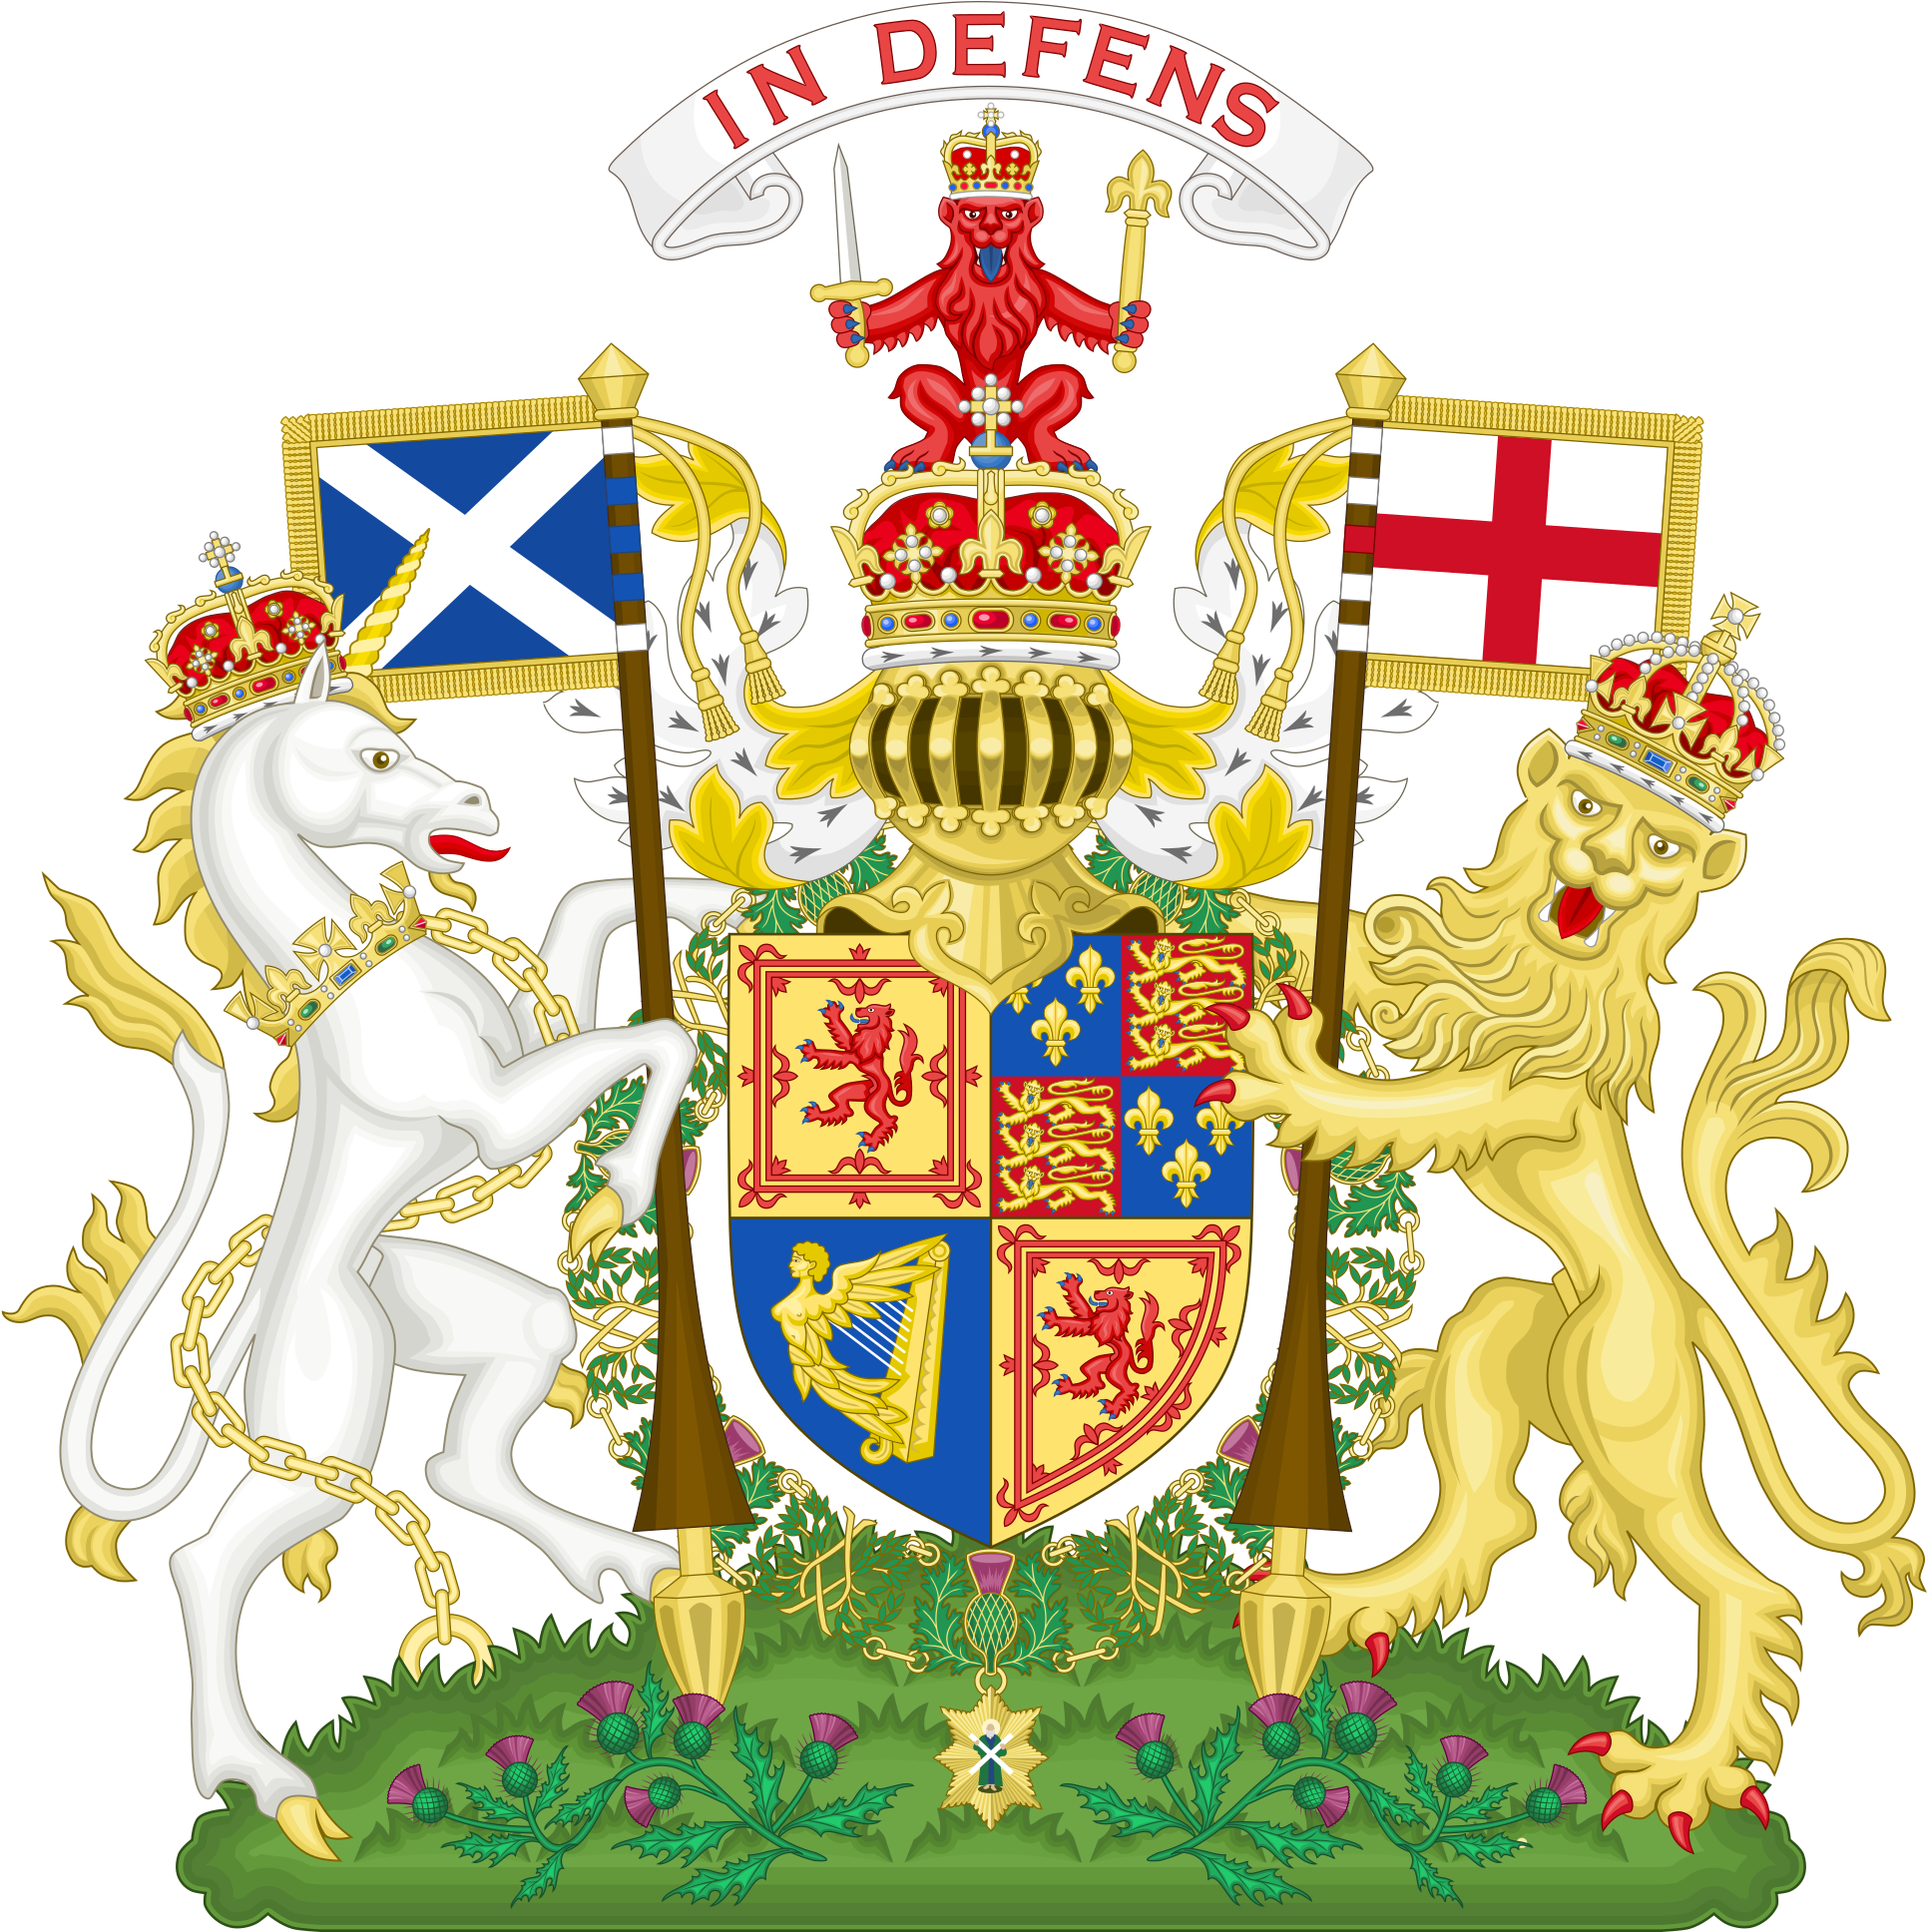 A Coat Of Arms With Lions And Flags